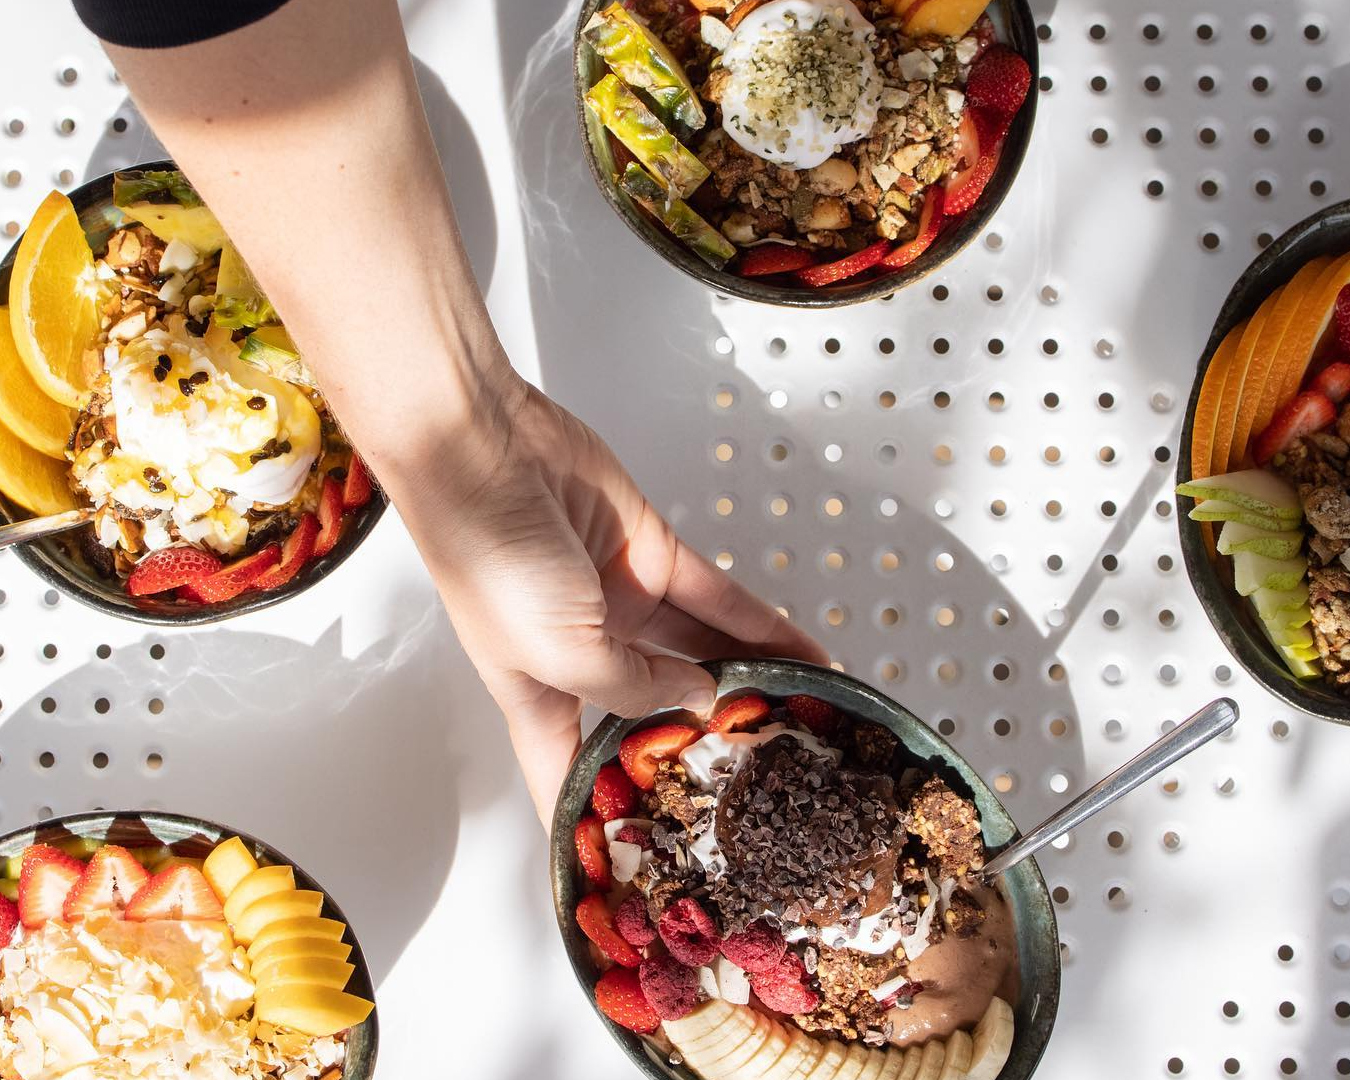 Hand holding a smoothie bowl above a table with various other smoothie bowls